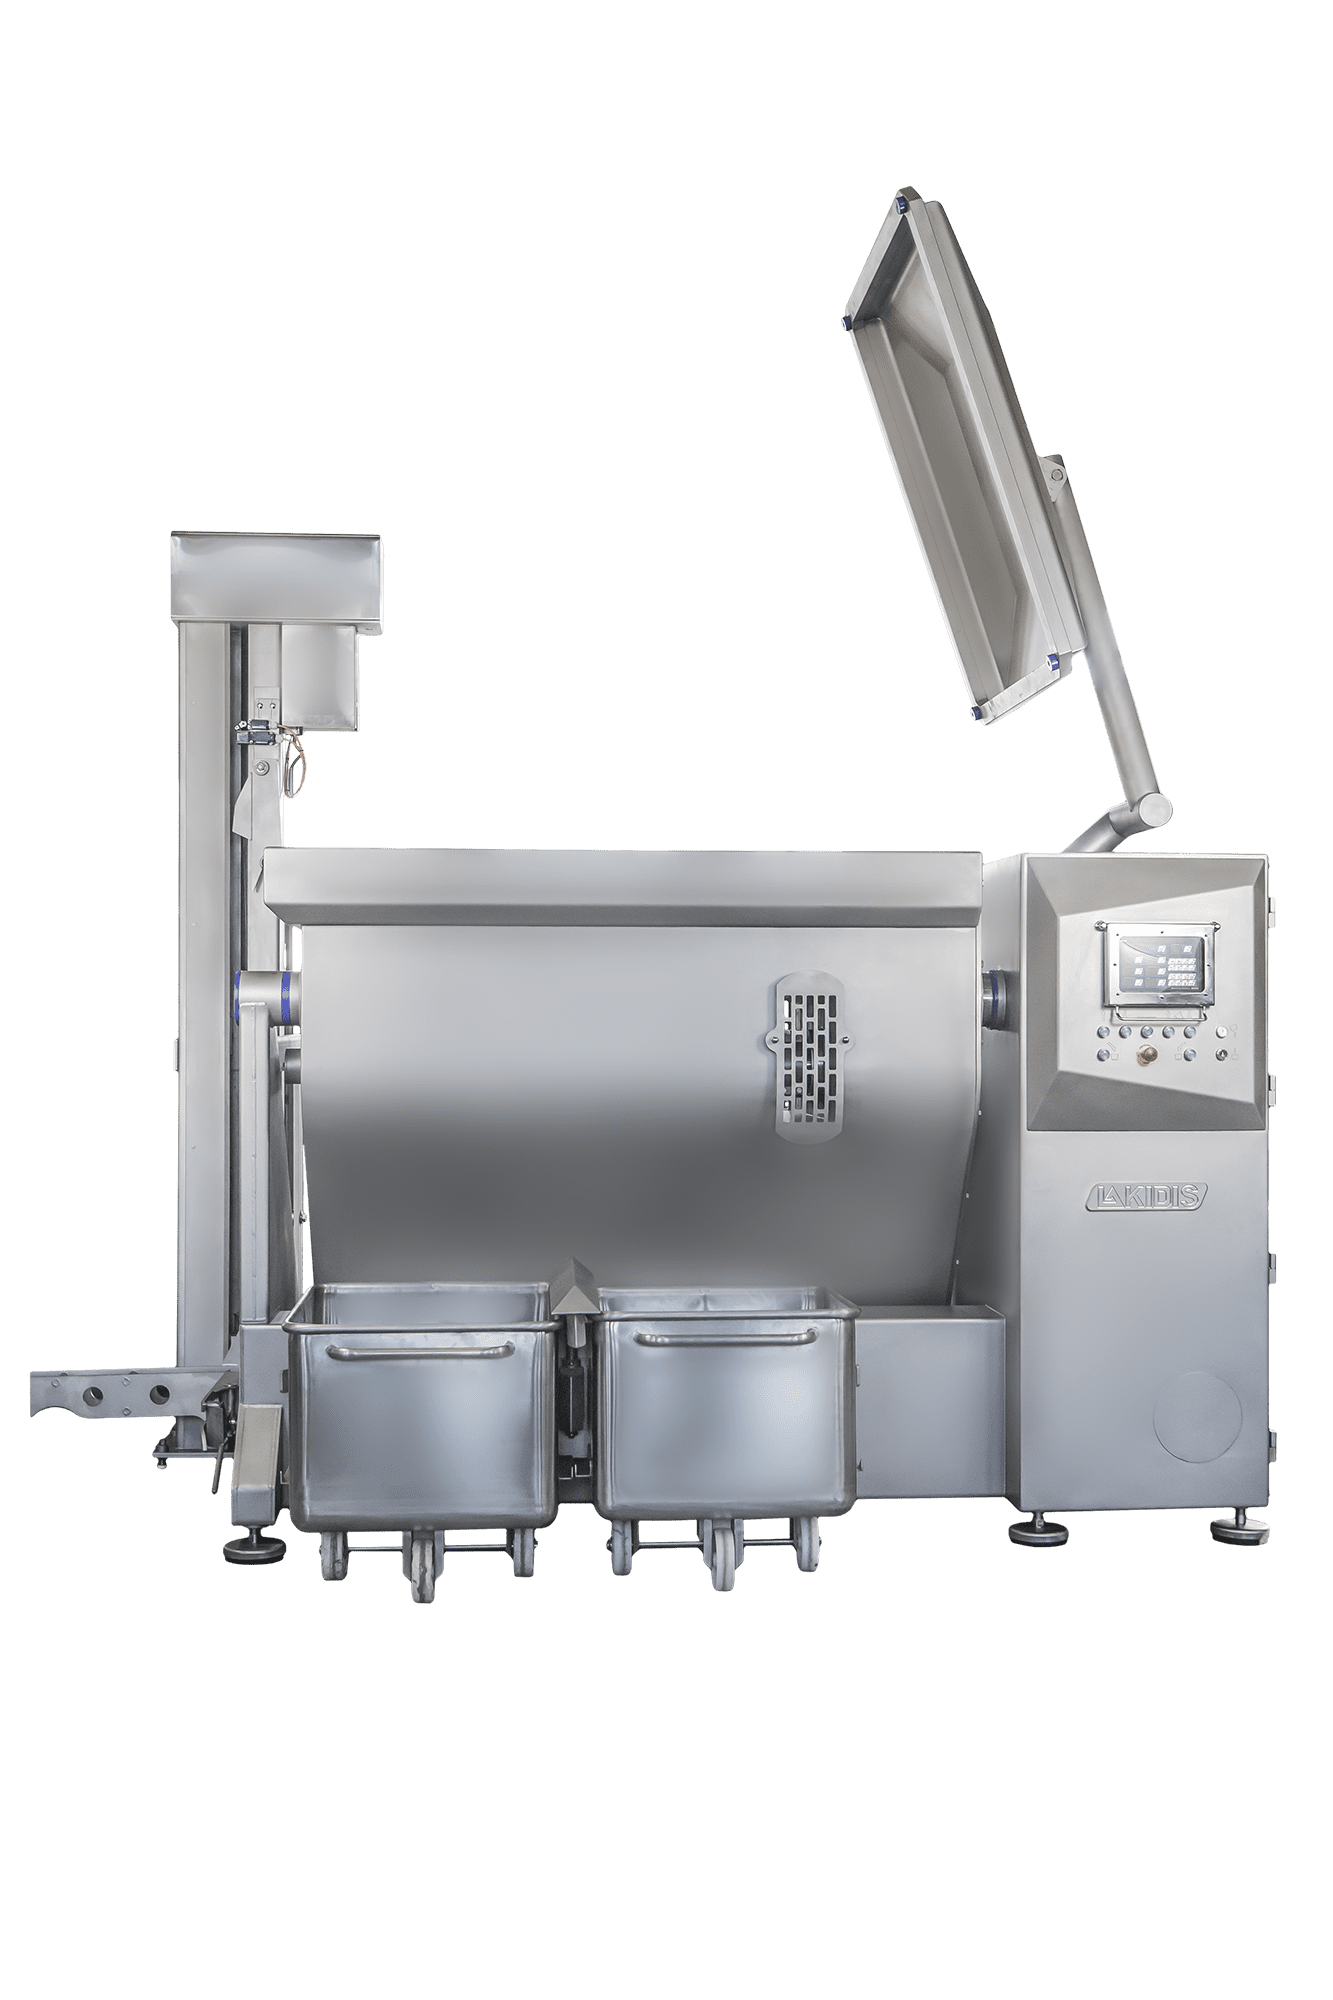 PZV1000L stainless steel mixer